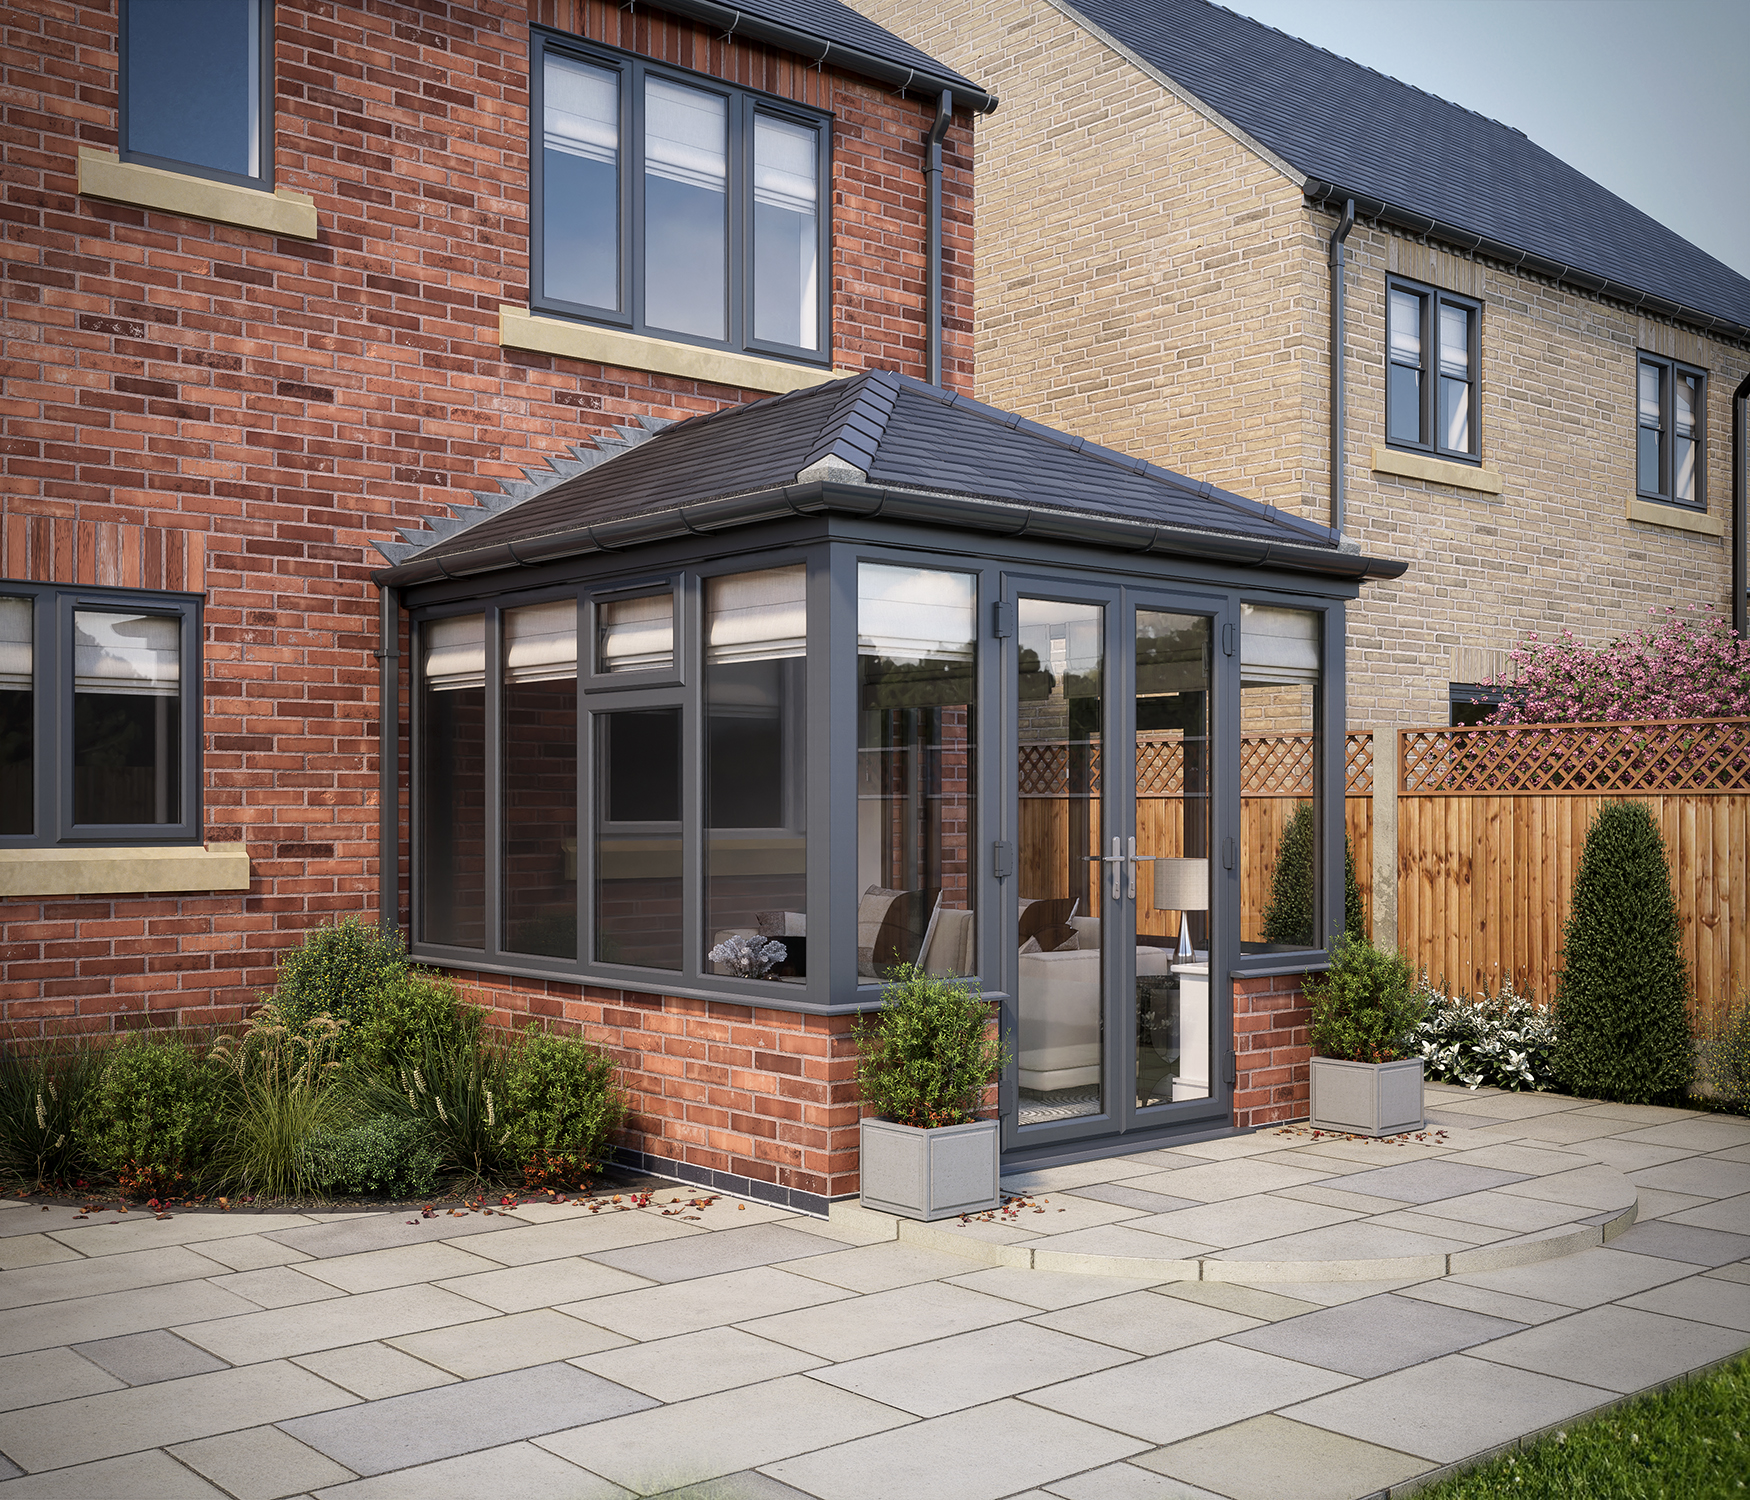 Image of SOLid Roof Edwardian Conservatory Grey Frames Dwarf Wall with Titanium Grey Tiles - 13 x 13ft